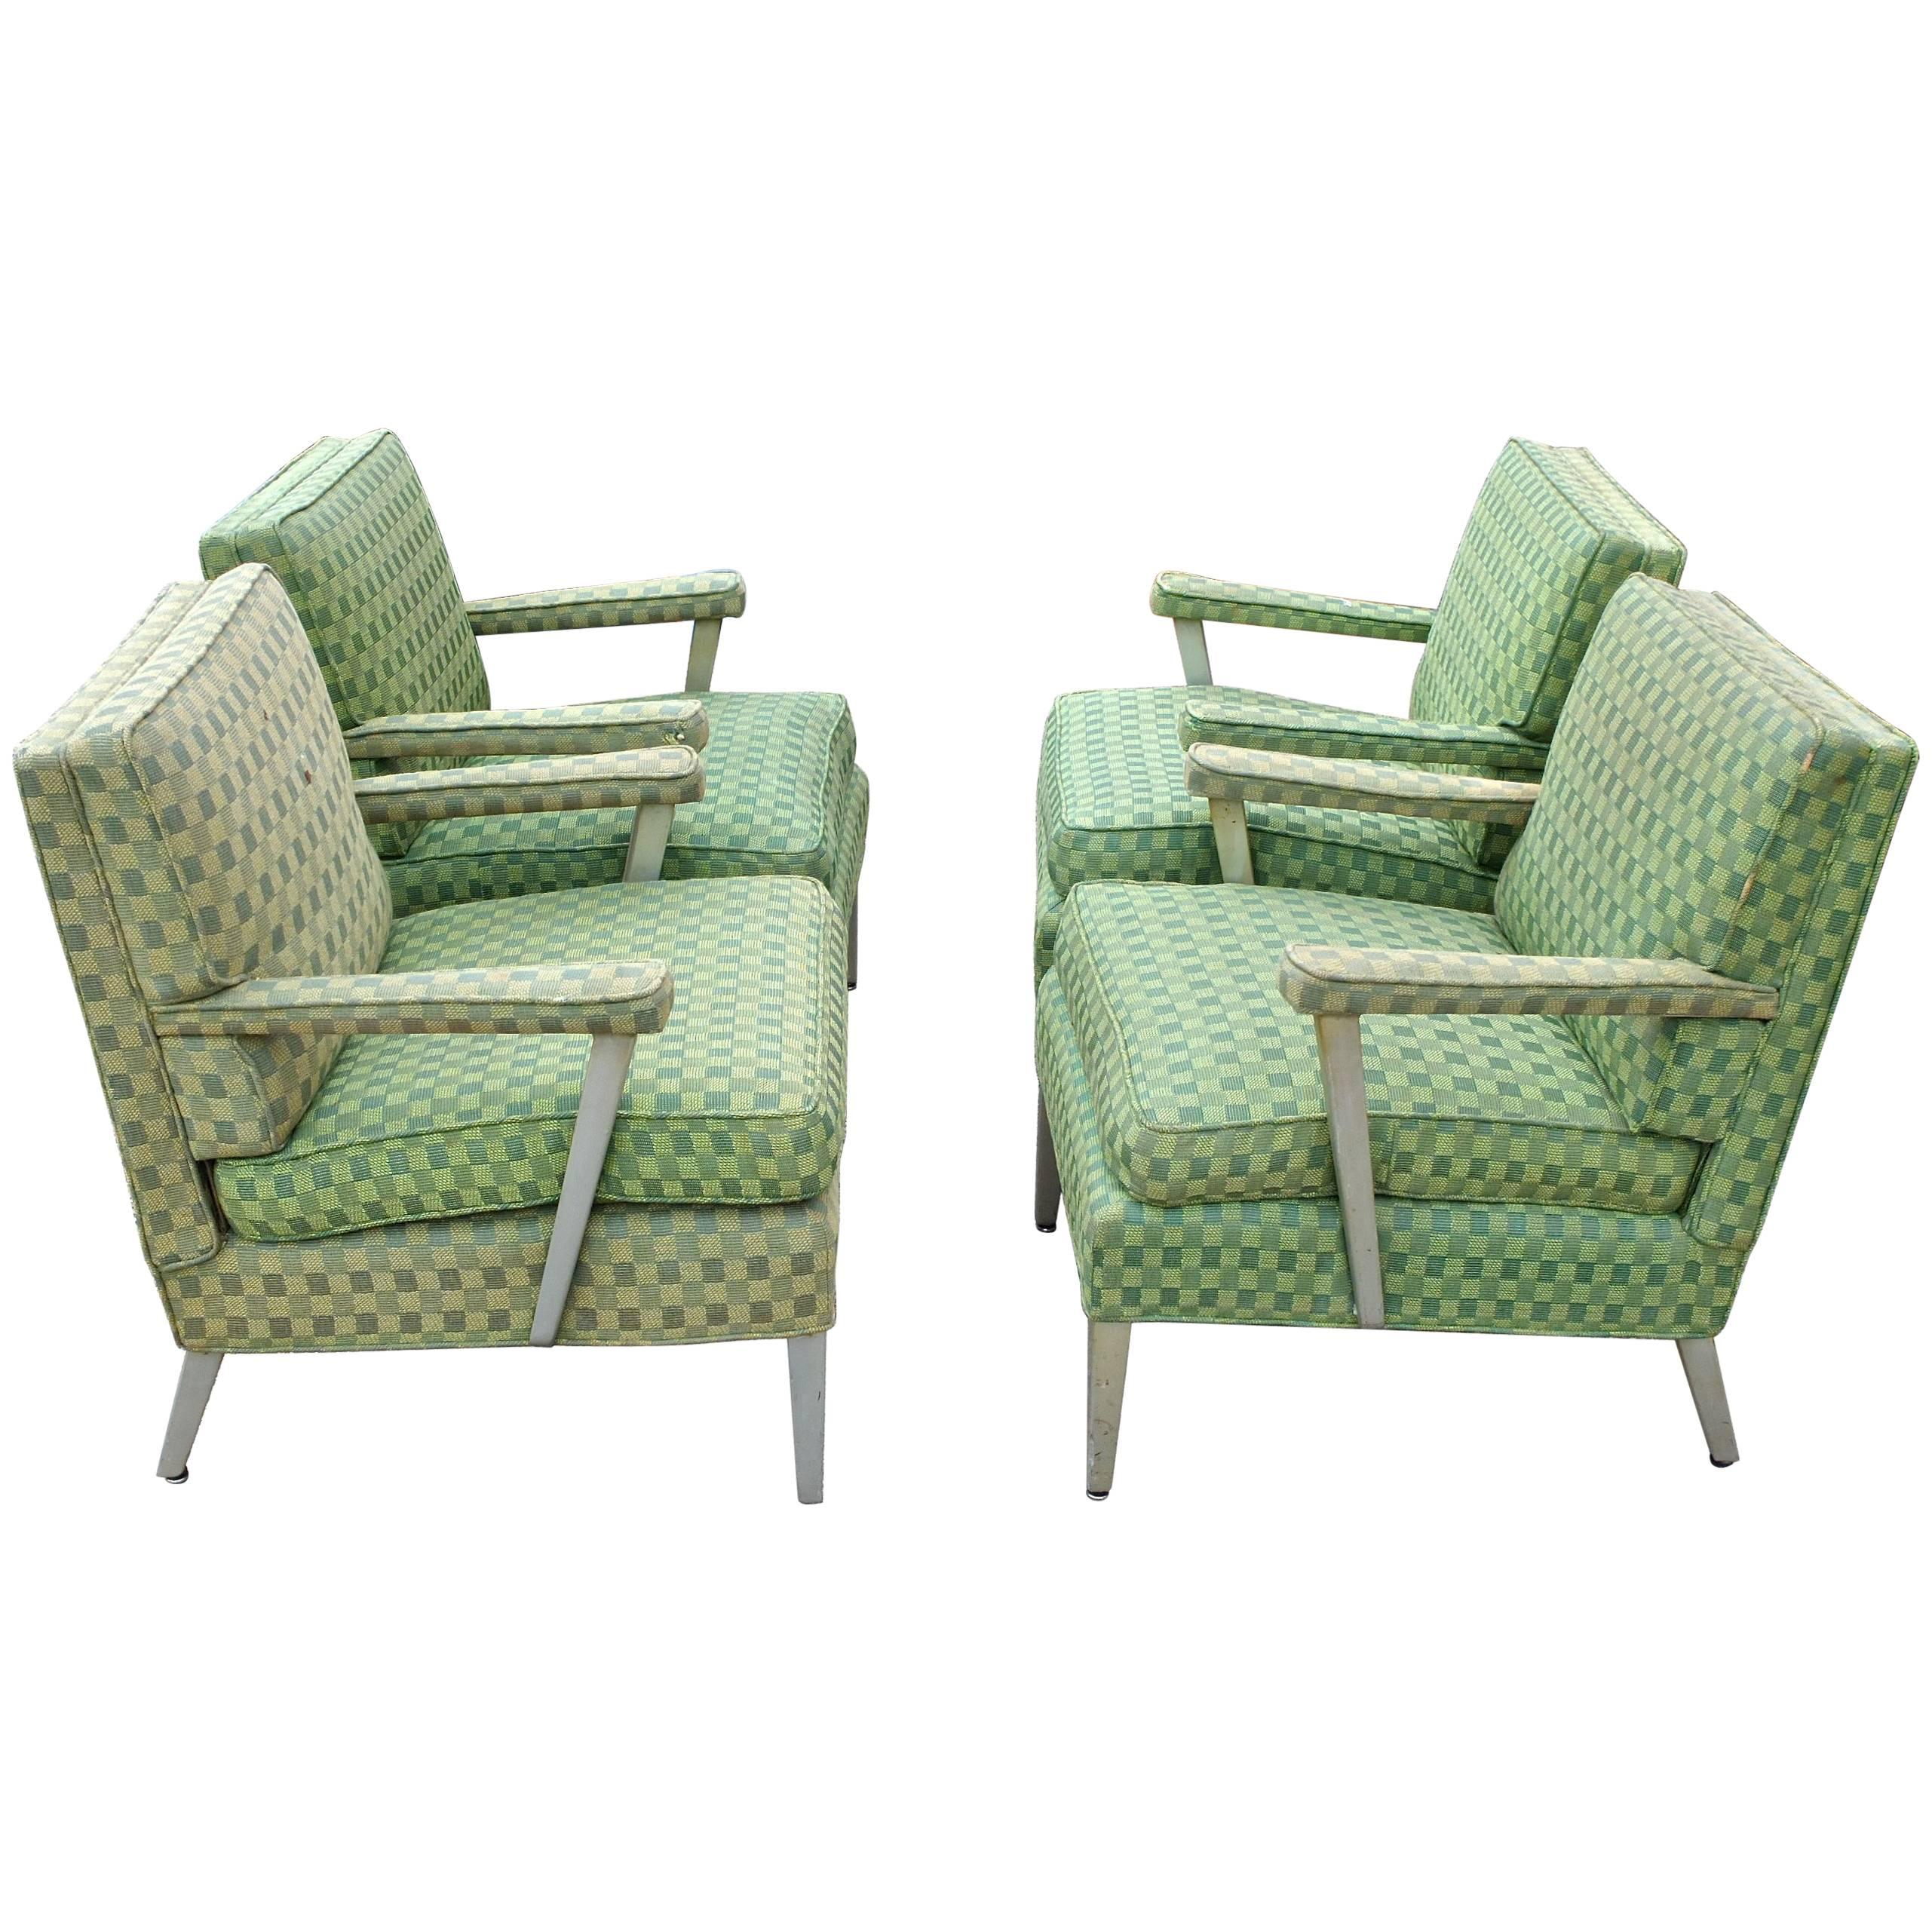 Set of Four SS United States First Class Cabin Upholstered Arm Chairs